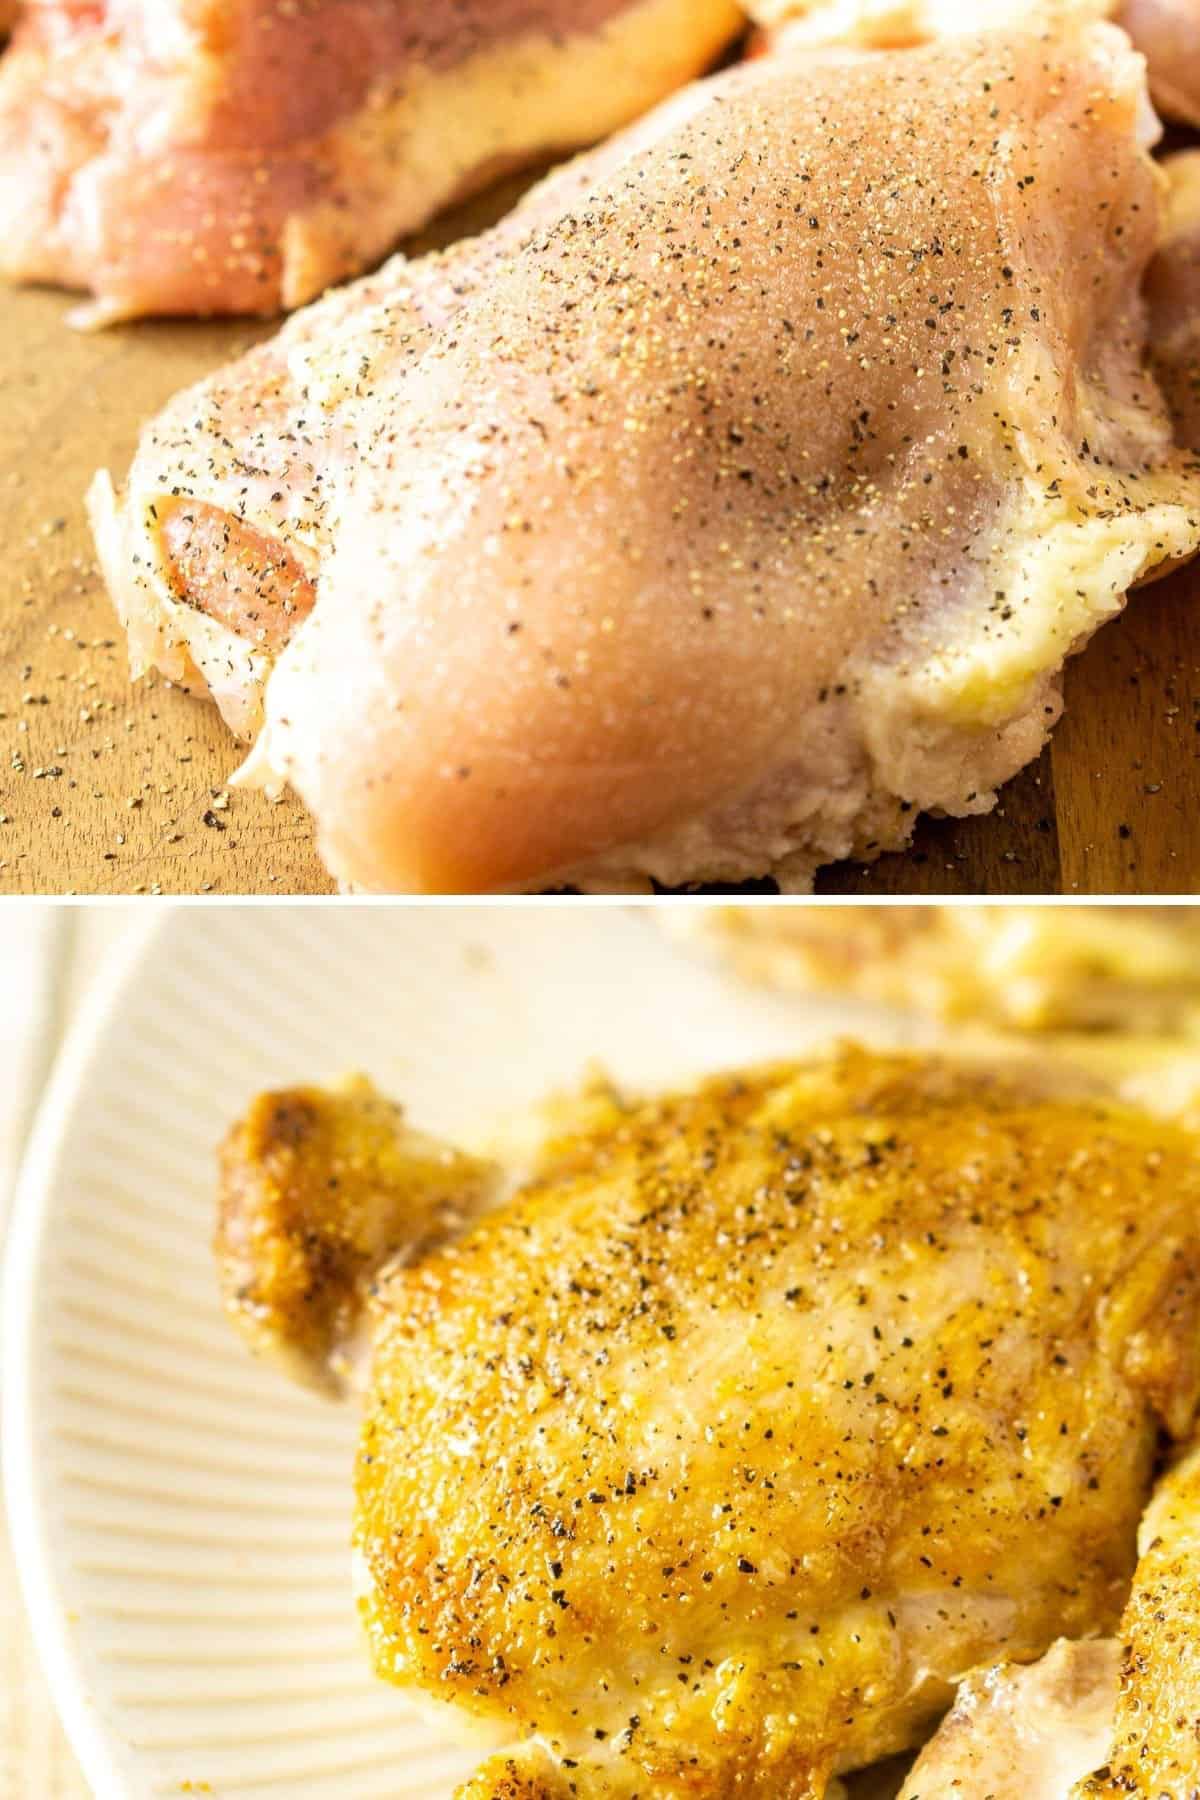 A collage showing the process of cooking the raw chicken until it browns.